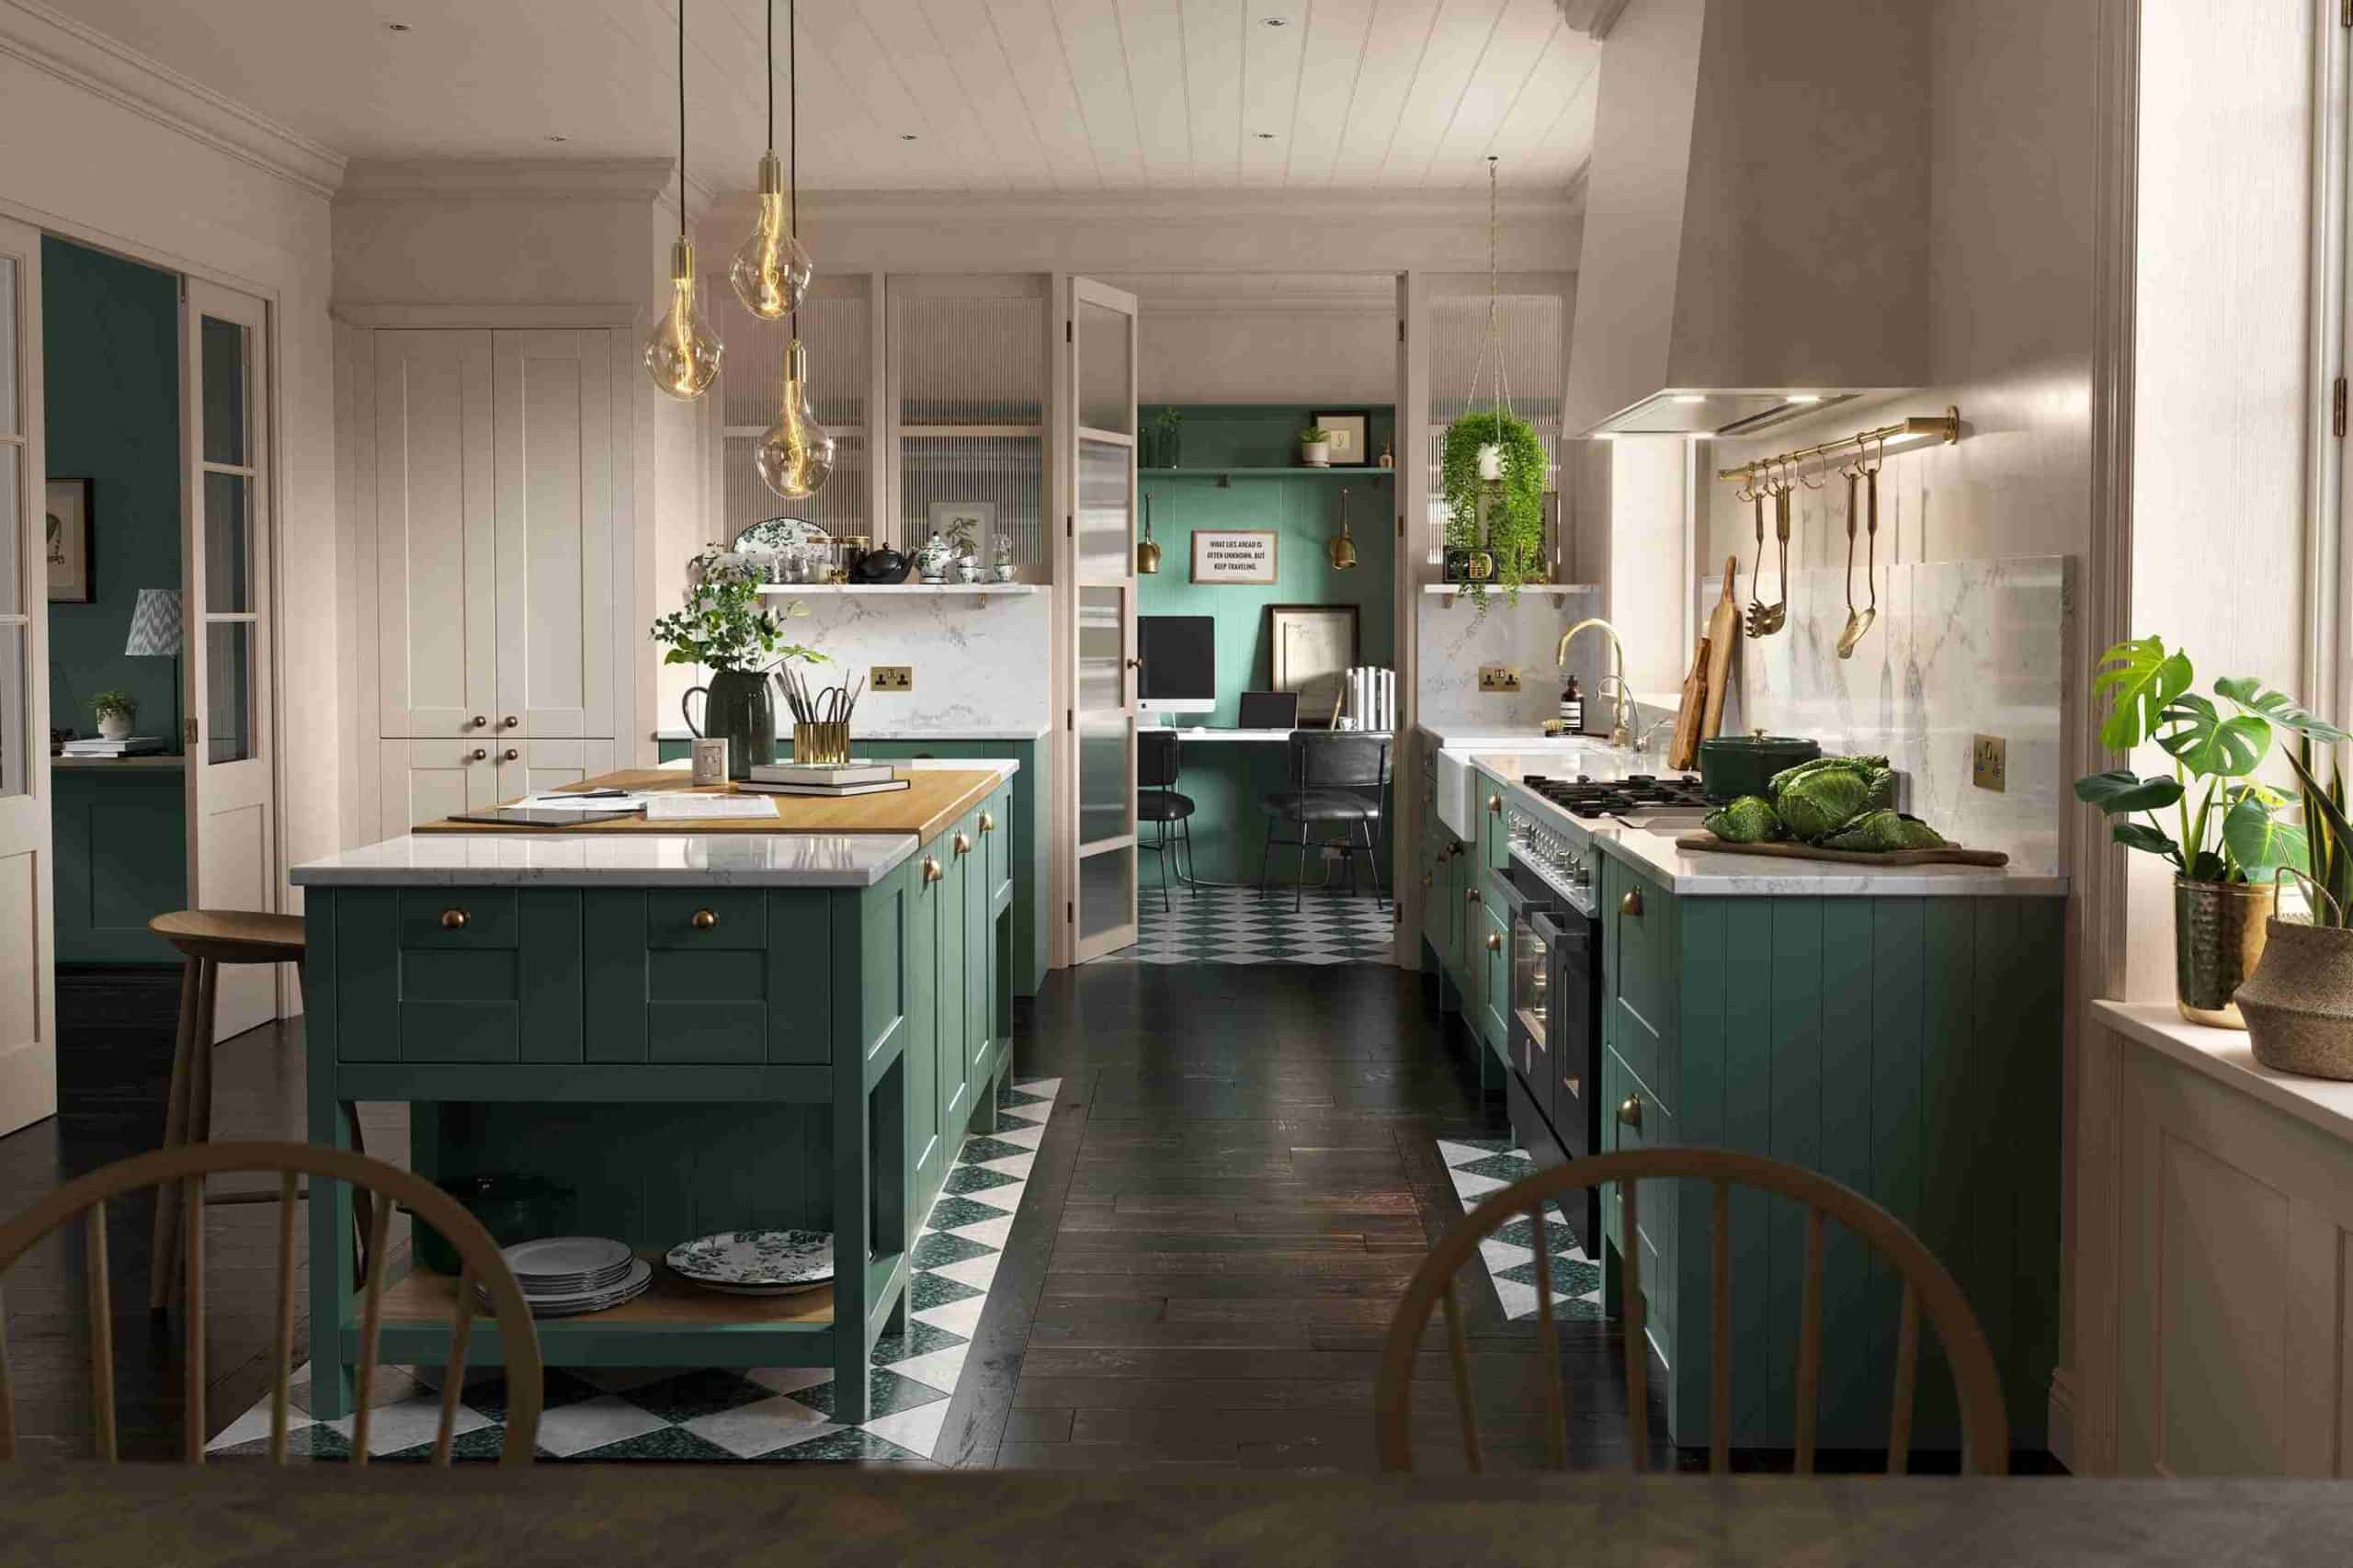 green colour kitchen interiors with hanging lights and indoor plants